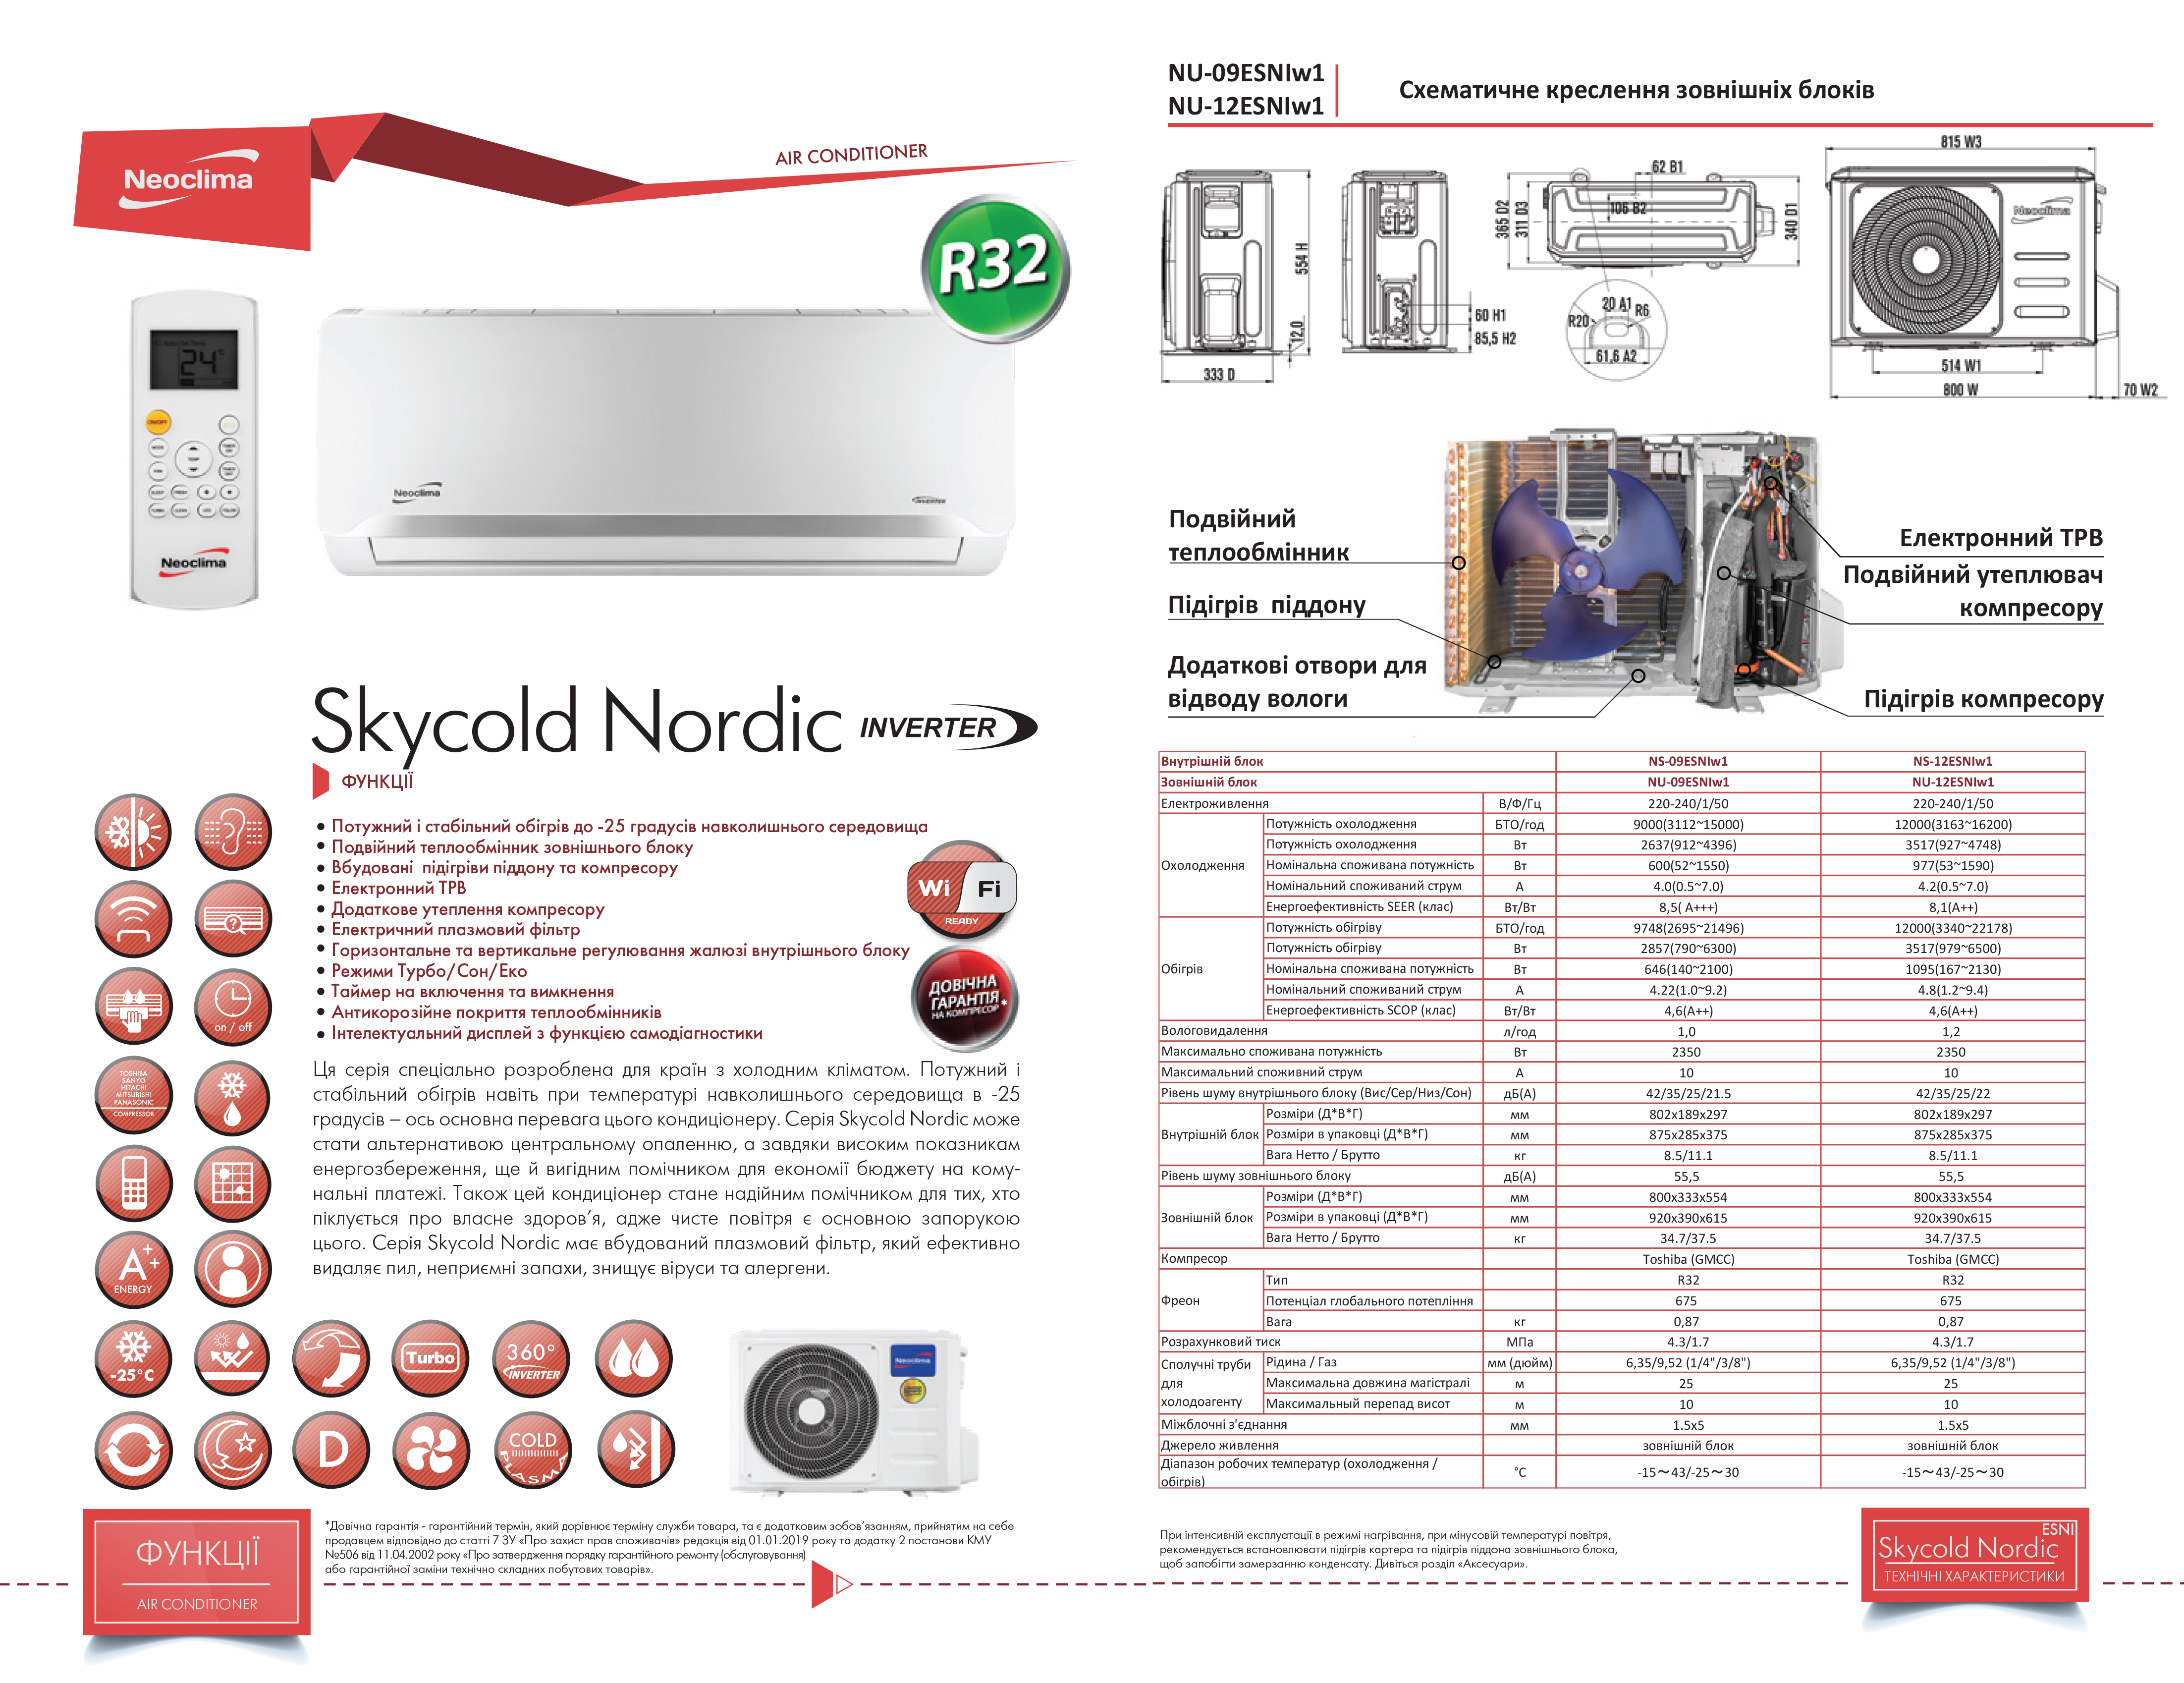 Neoclima Skycold Nordic NS/NU-12ESNIw1 Характеристики